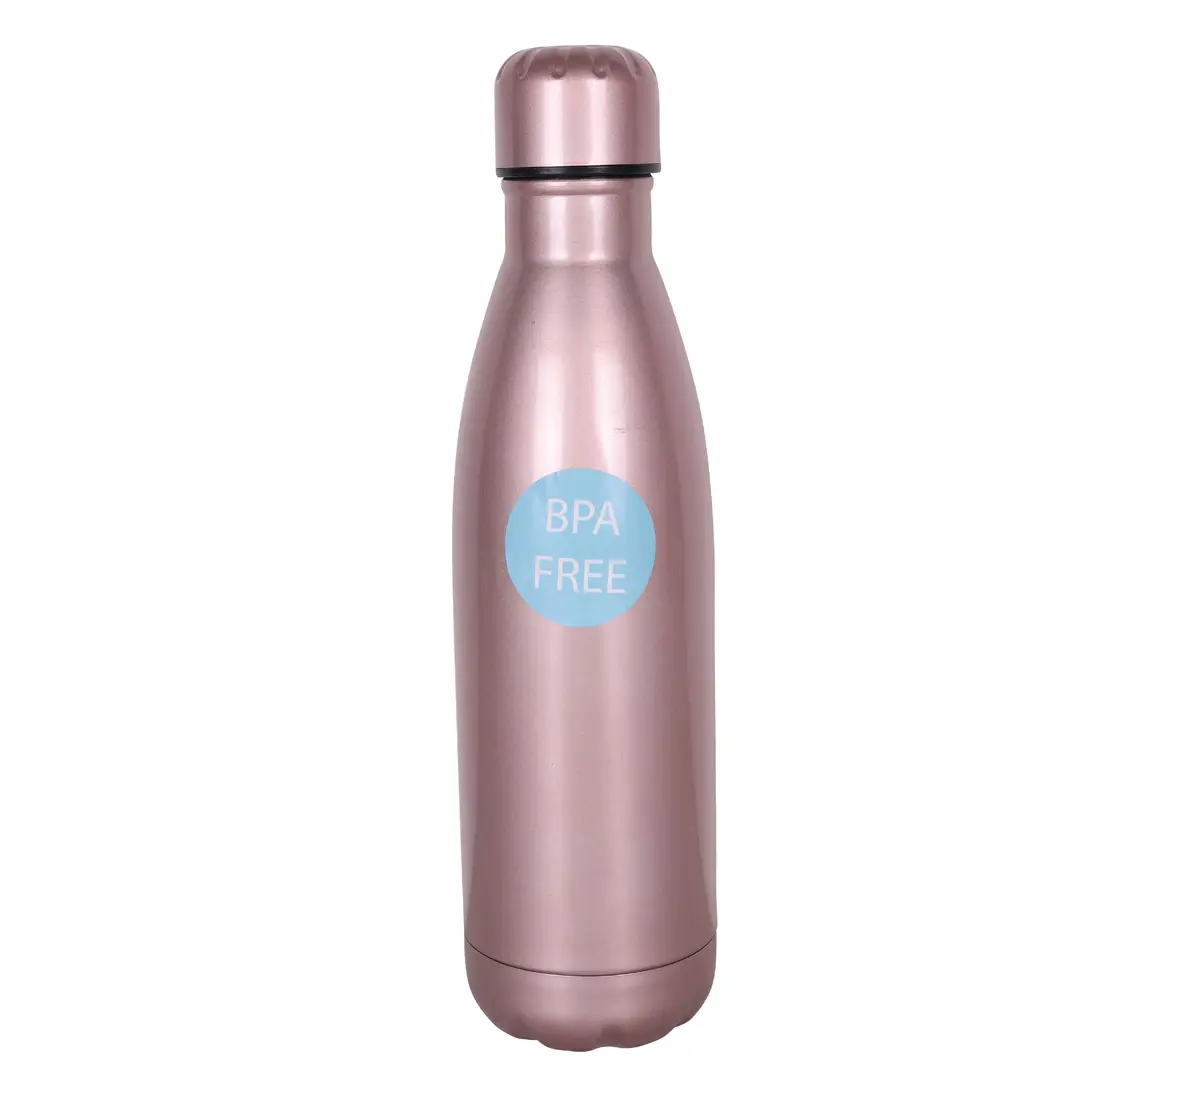 Stainless Steel Insulated Water Bottle by Hamster London for Kids, Rose Pink, Non-Toxic, BPA Free, 750ml, 5Y+